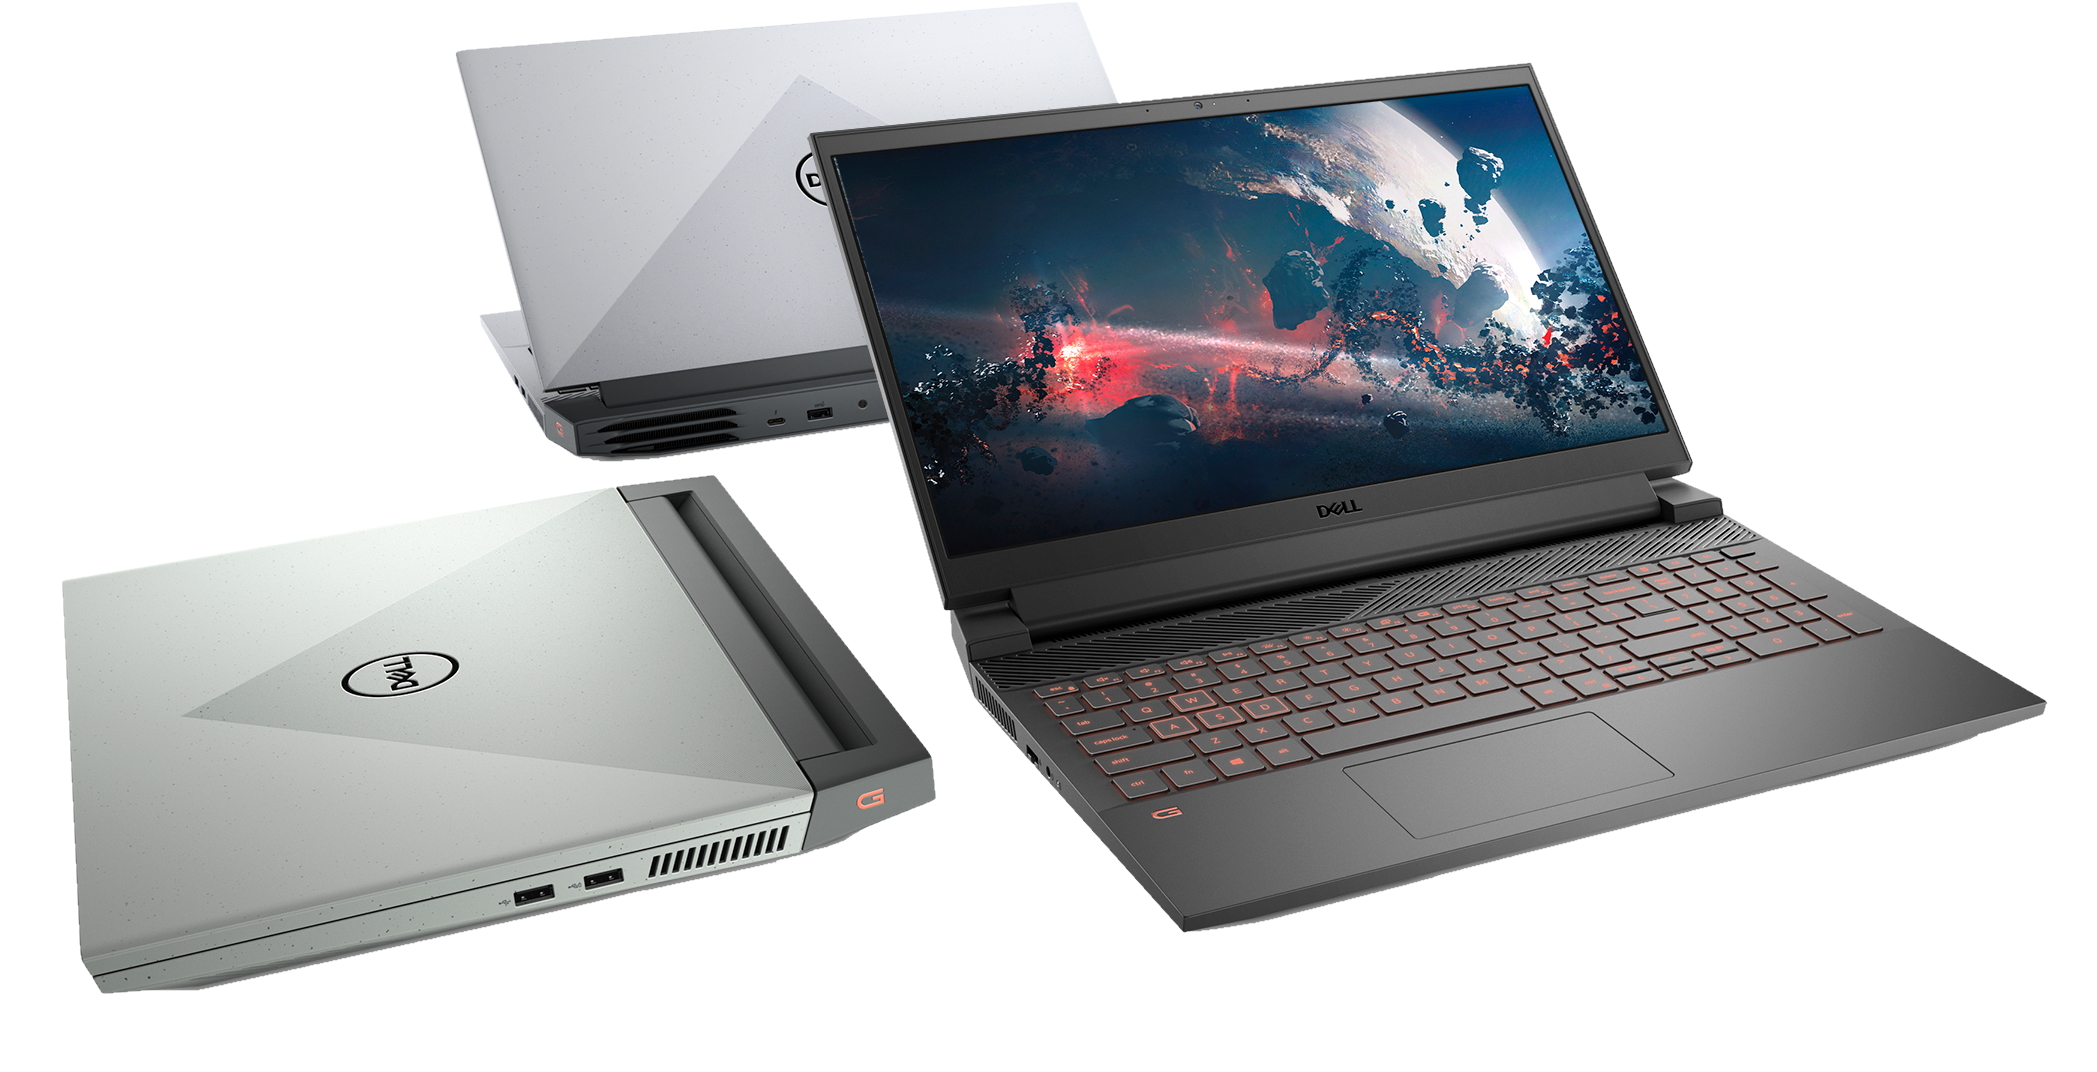 Dell G15 refreshed with an NVIDIA GeForce RTX 3060 and a choice between AMD Ryzen 5000 or Intel Comet Lake-H processors - NotebookCheck.net News